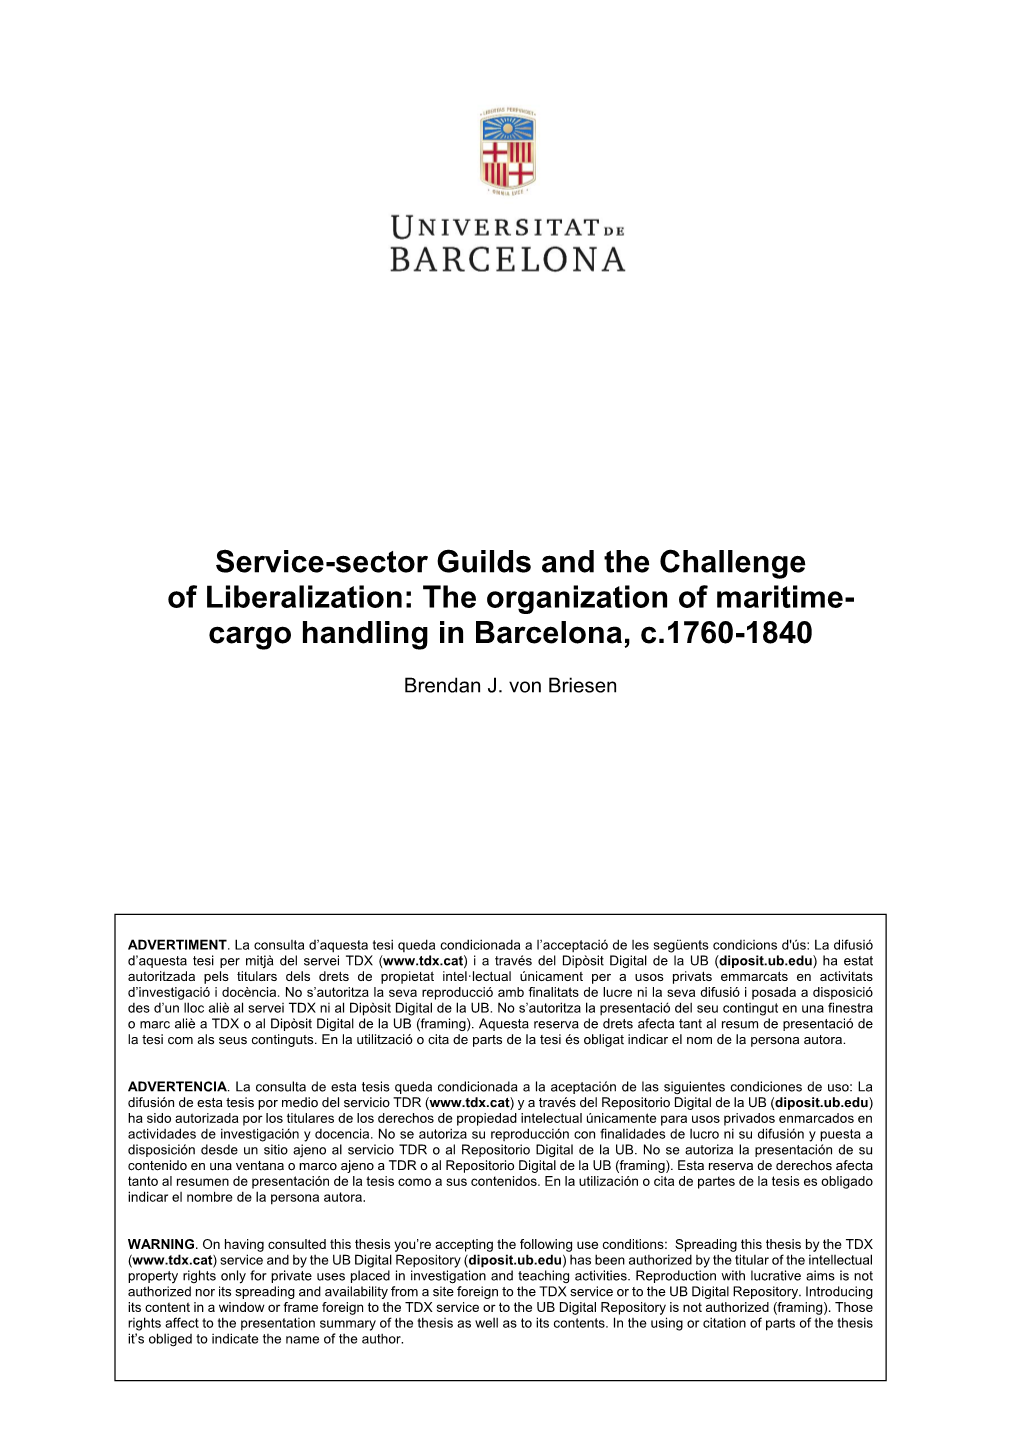 Service-Sector Guilds and the Challenge of Liberalization: the Organization of Maritime- Cargo Handling in Barcelona, C.1760-1840